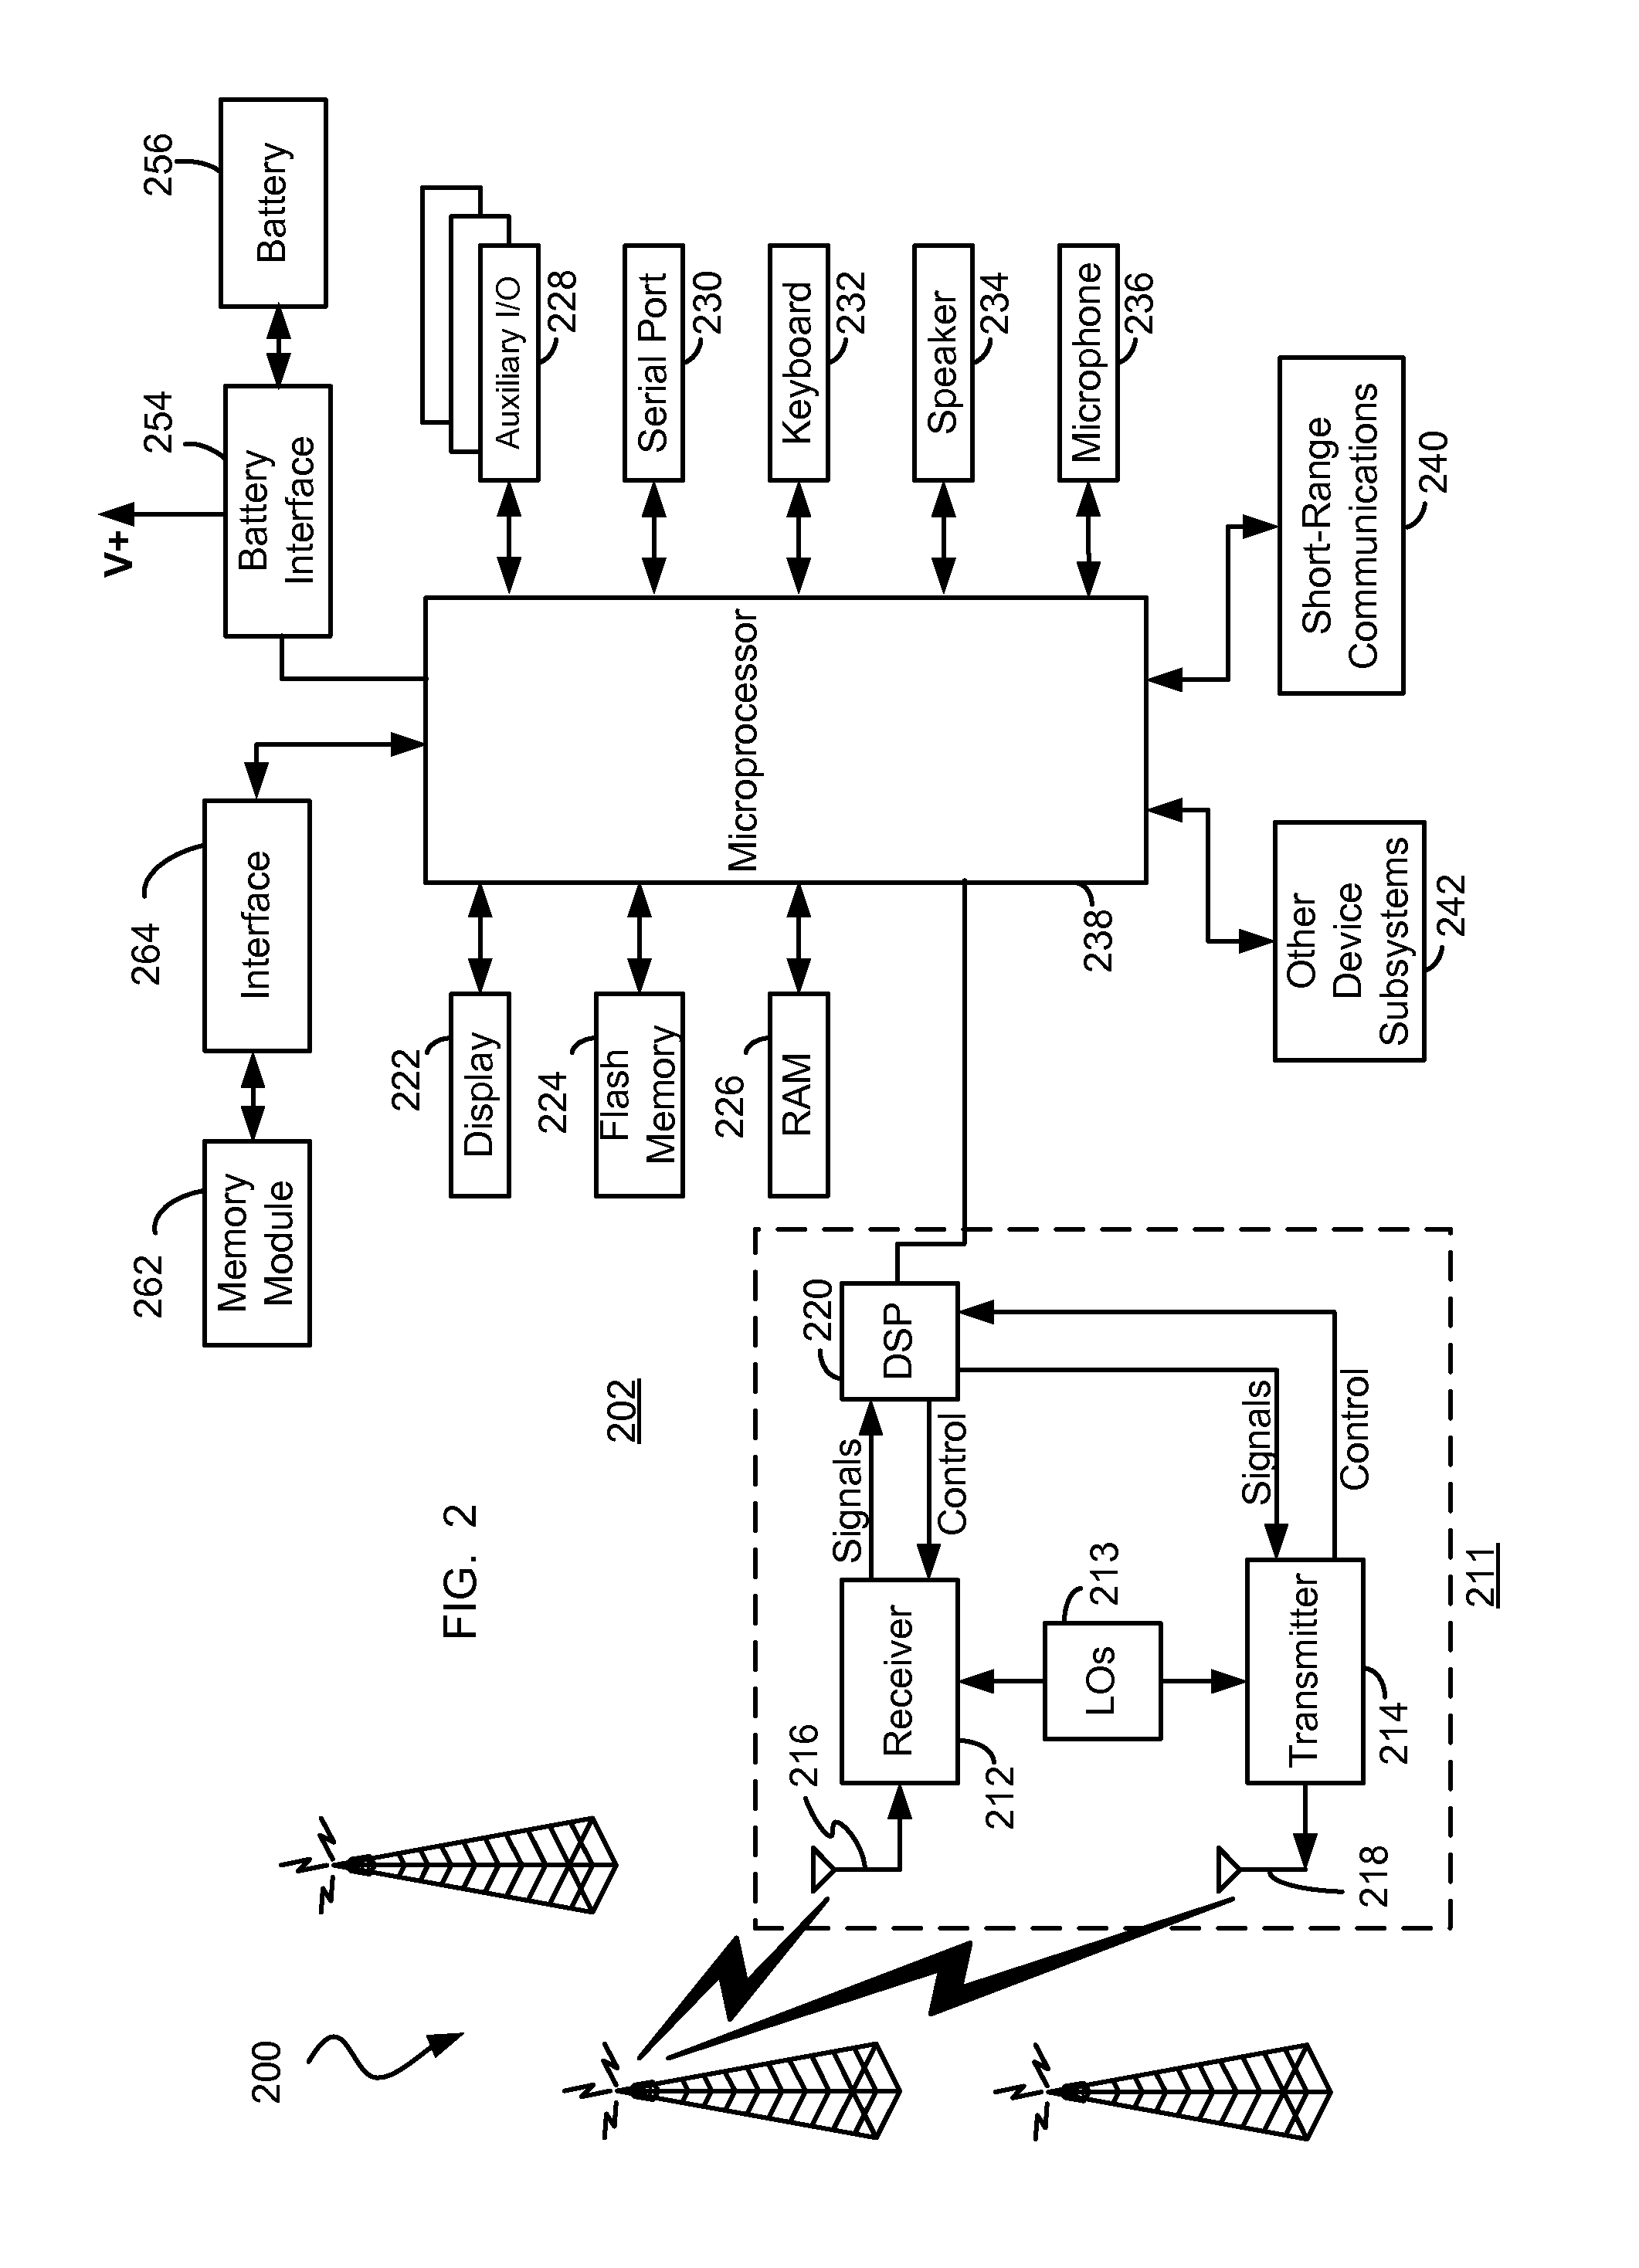 Device-based network service provisioning